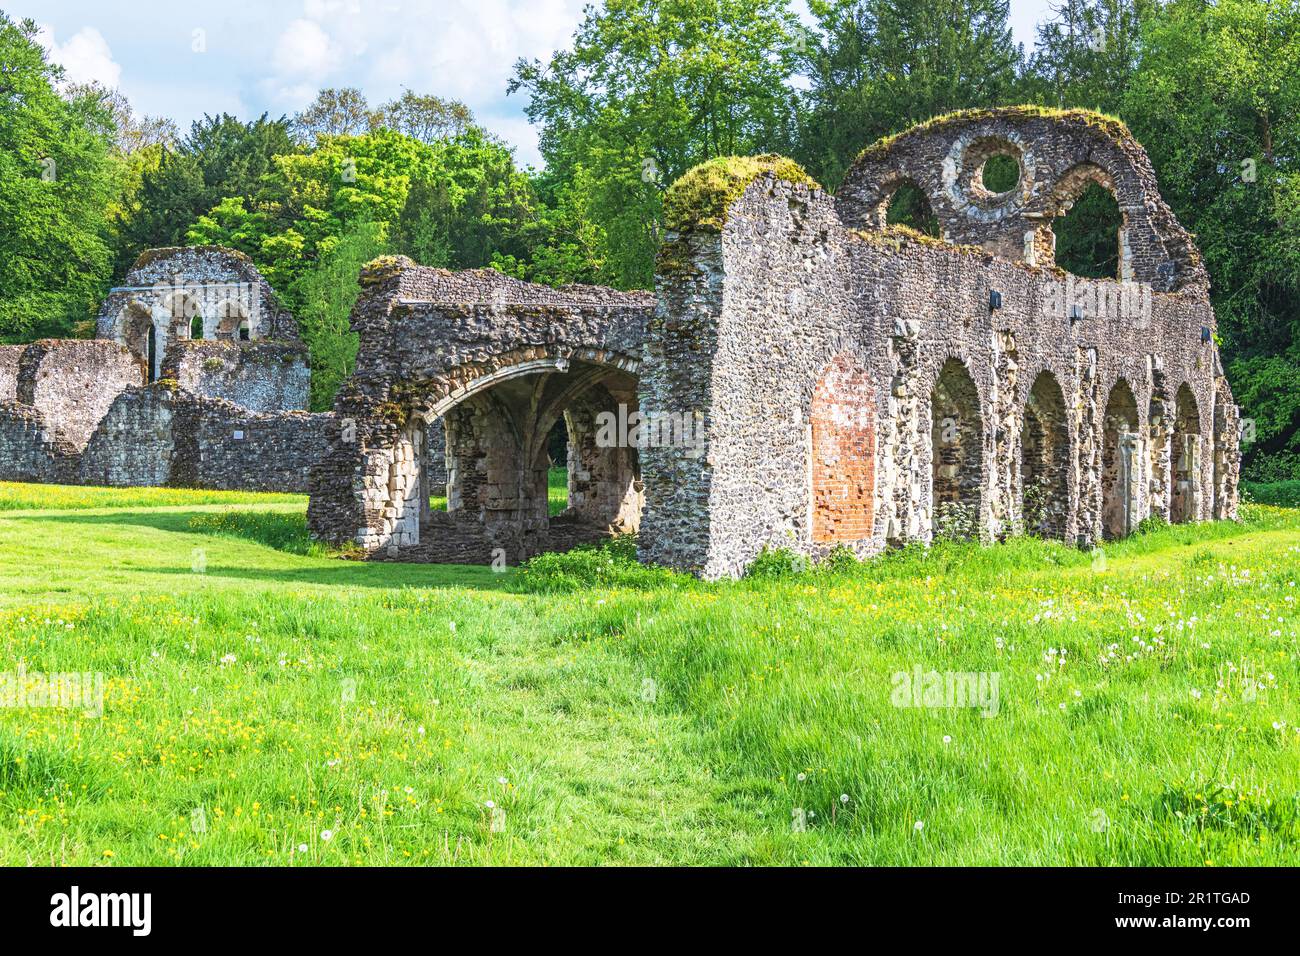 The ruined undercroft at Waverley Abbey near Farnham, Surrey. The Abbey was the first Cistercian Monastery built n England in 1128. Stock Photo